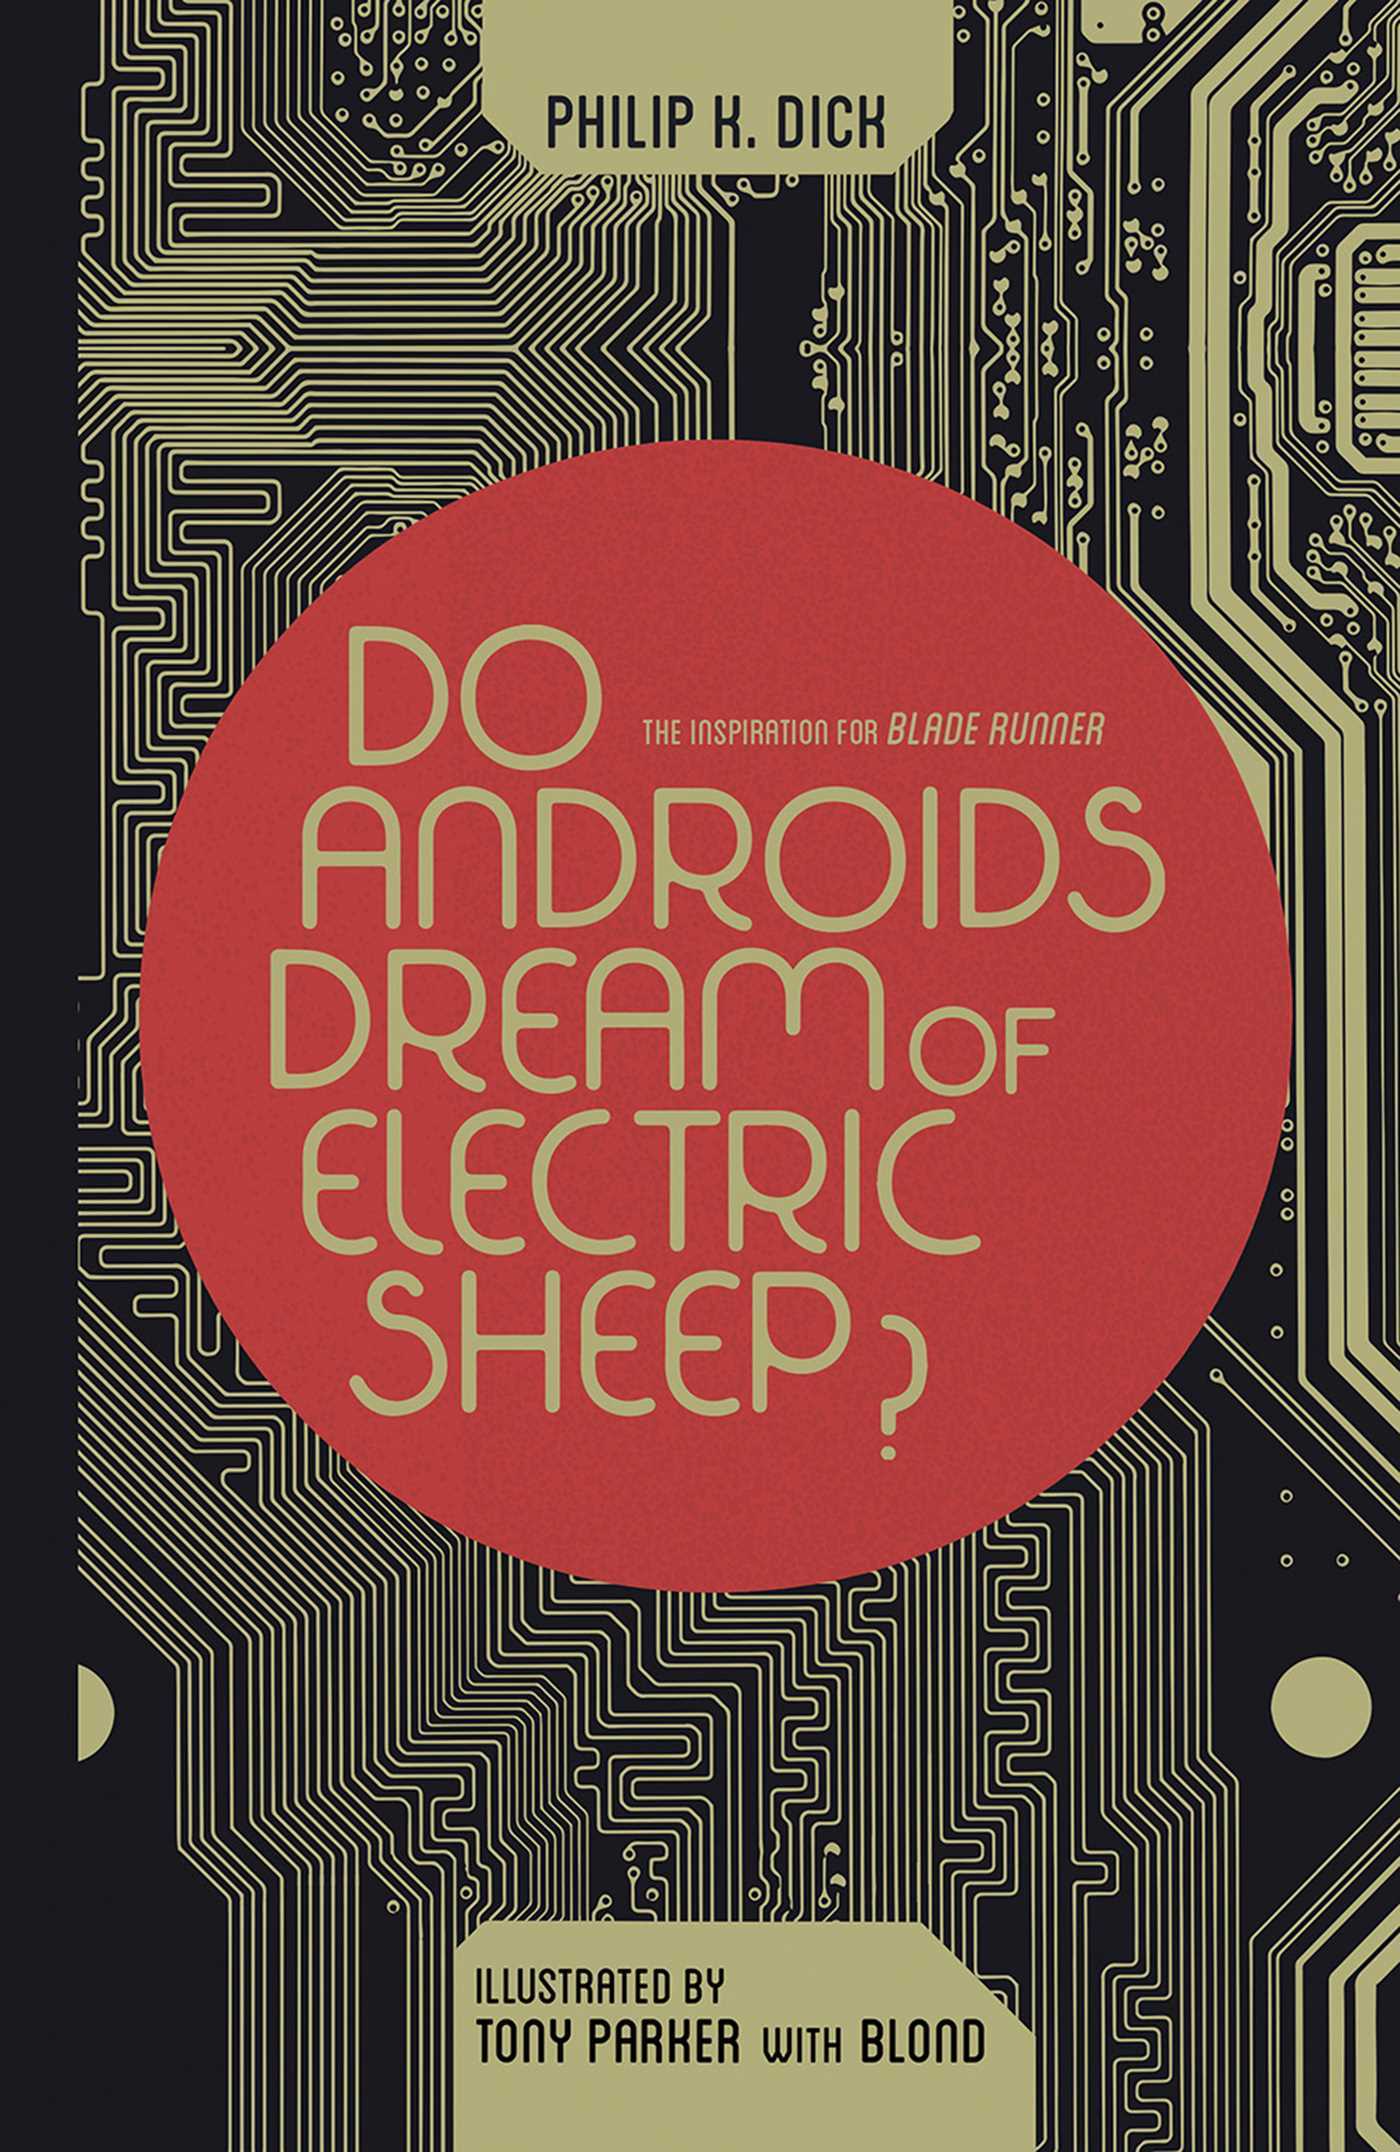 Book Club reads "Do Androids Dream of Electric Sheep"